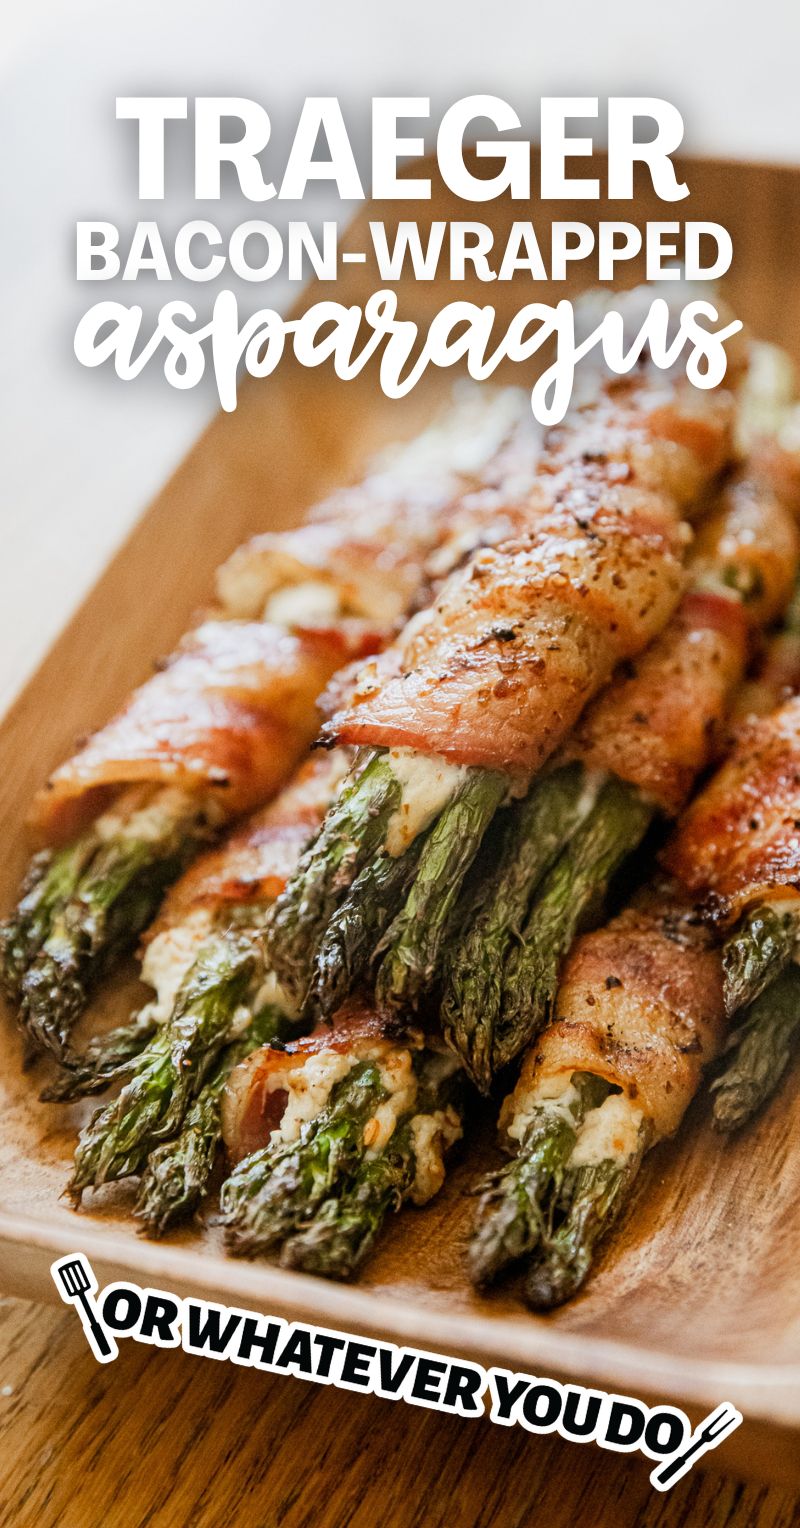 GRILLED BACON-WRAPPED ASPARAGUS